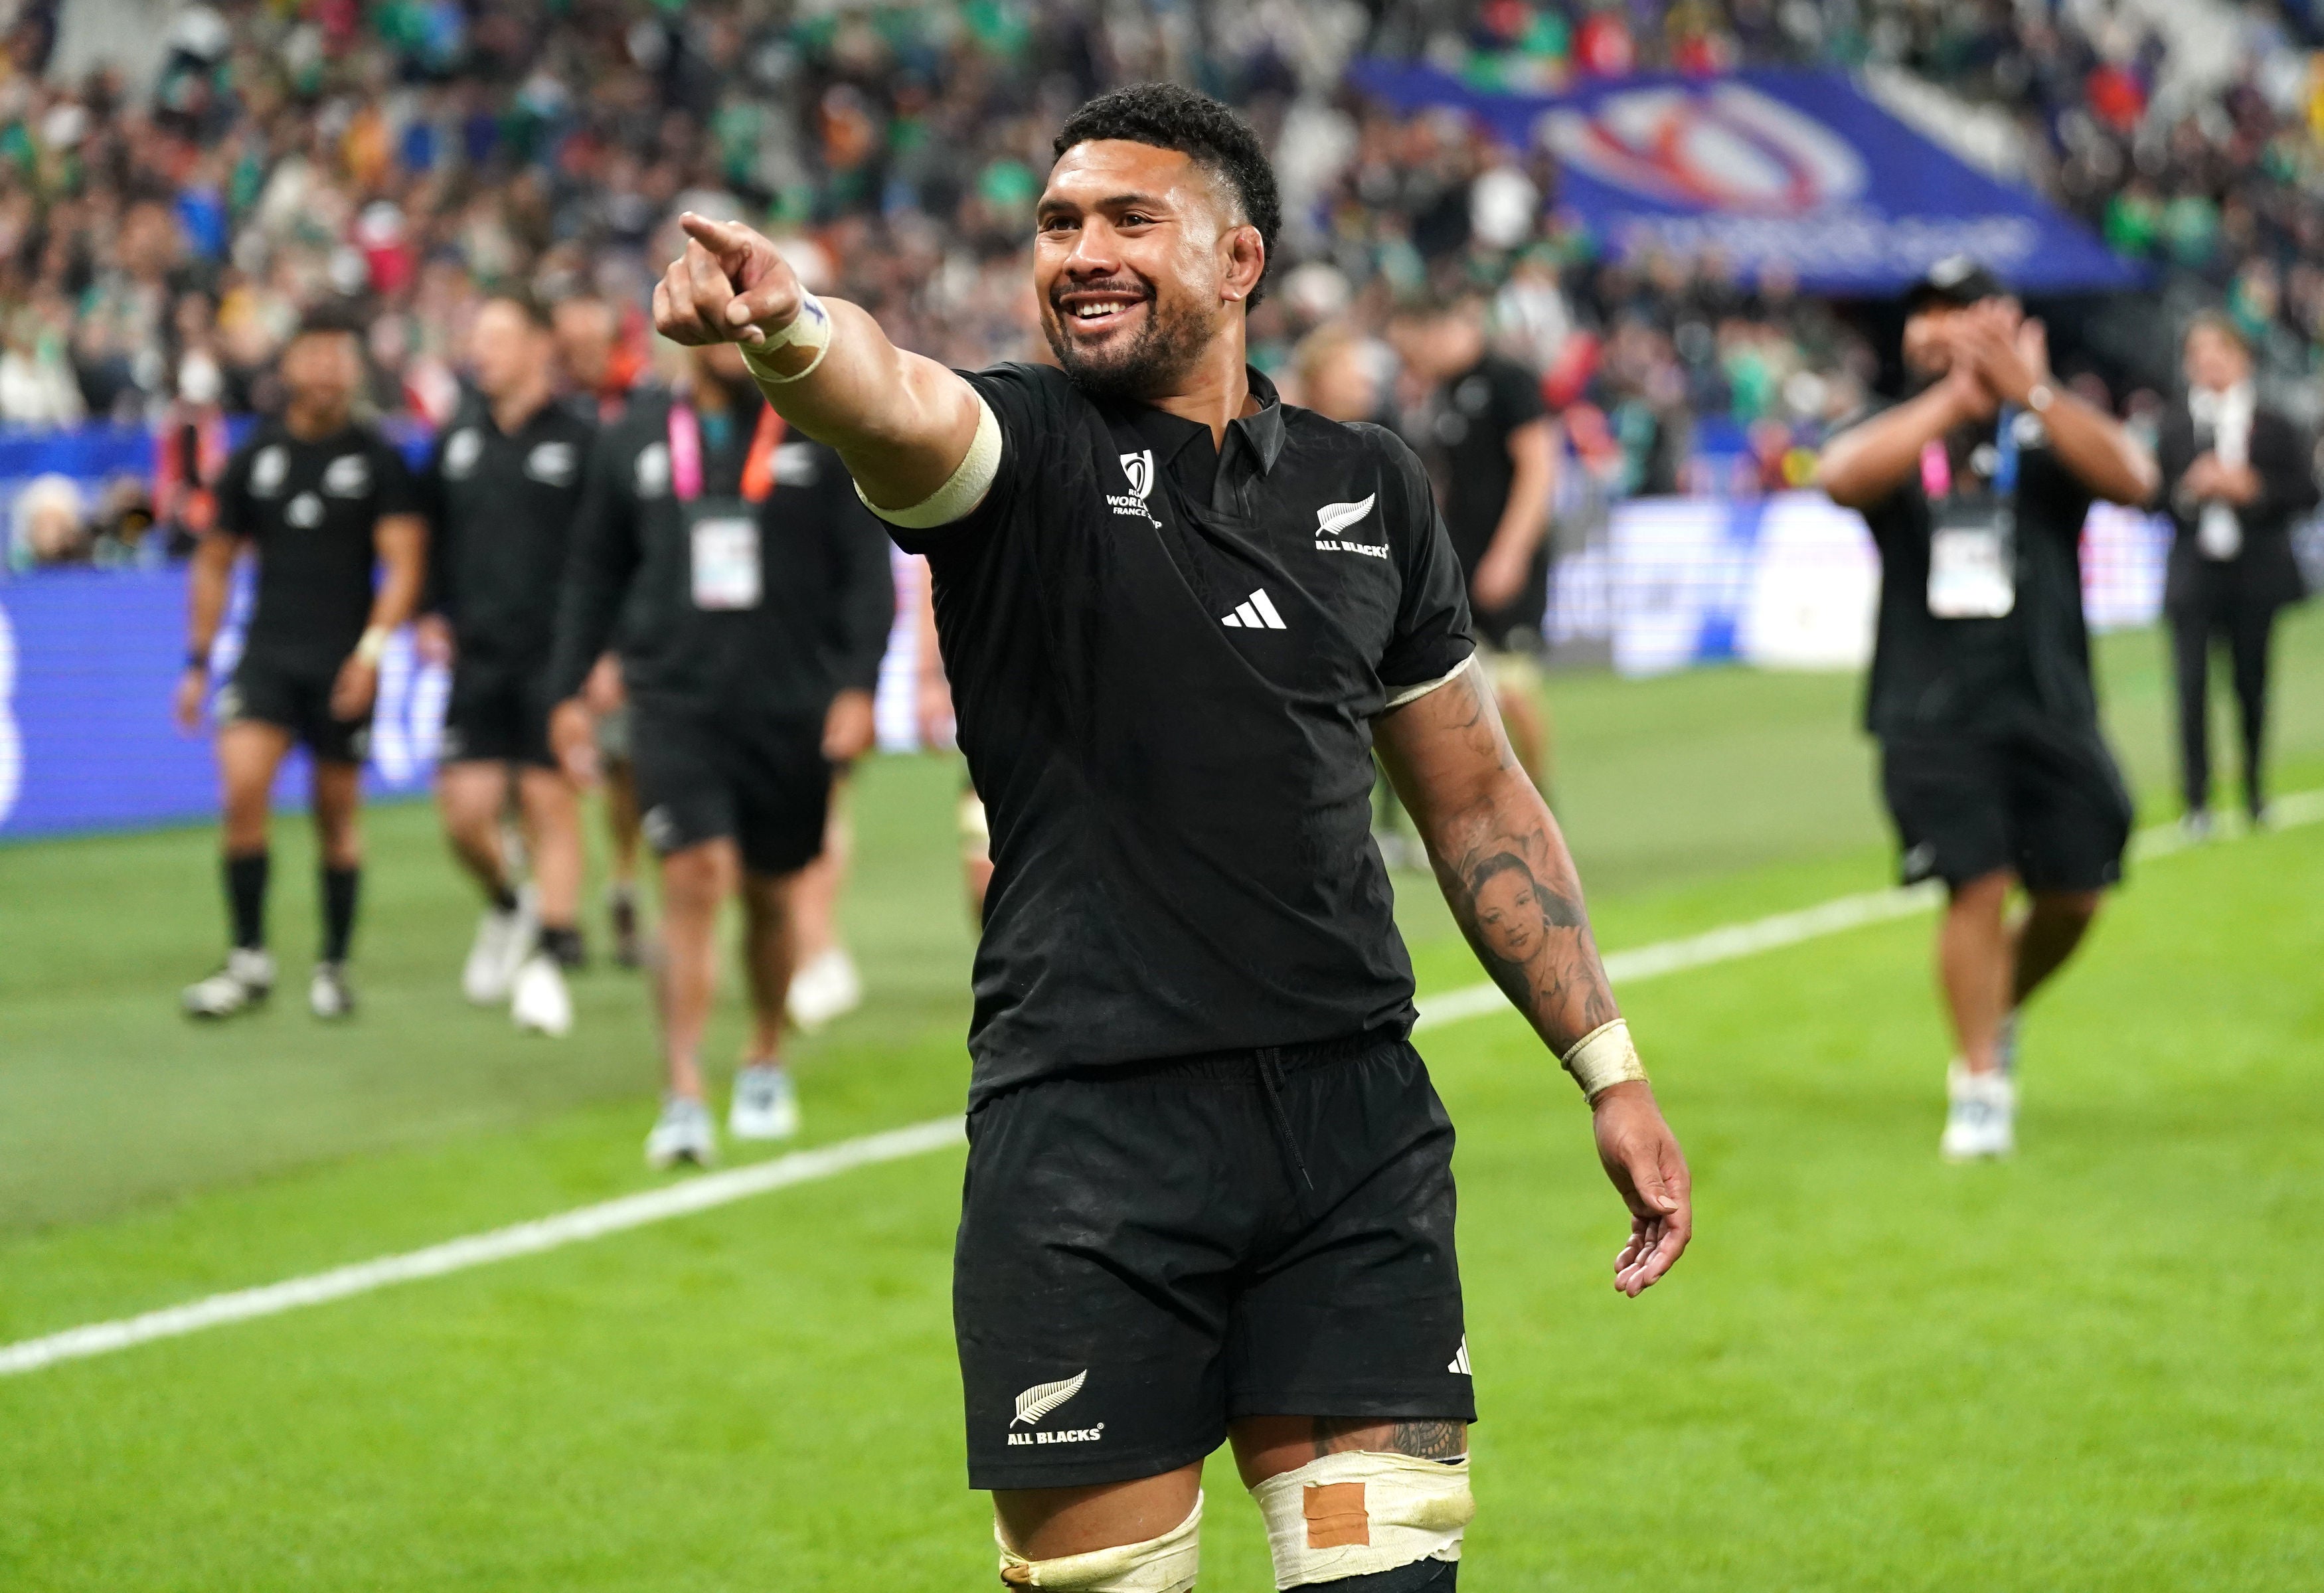 Ardie Savea is a strong contender for the award